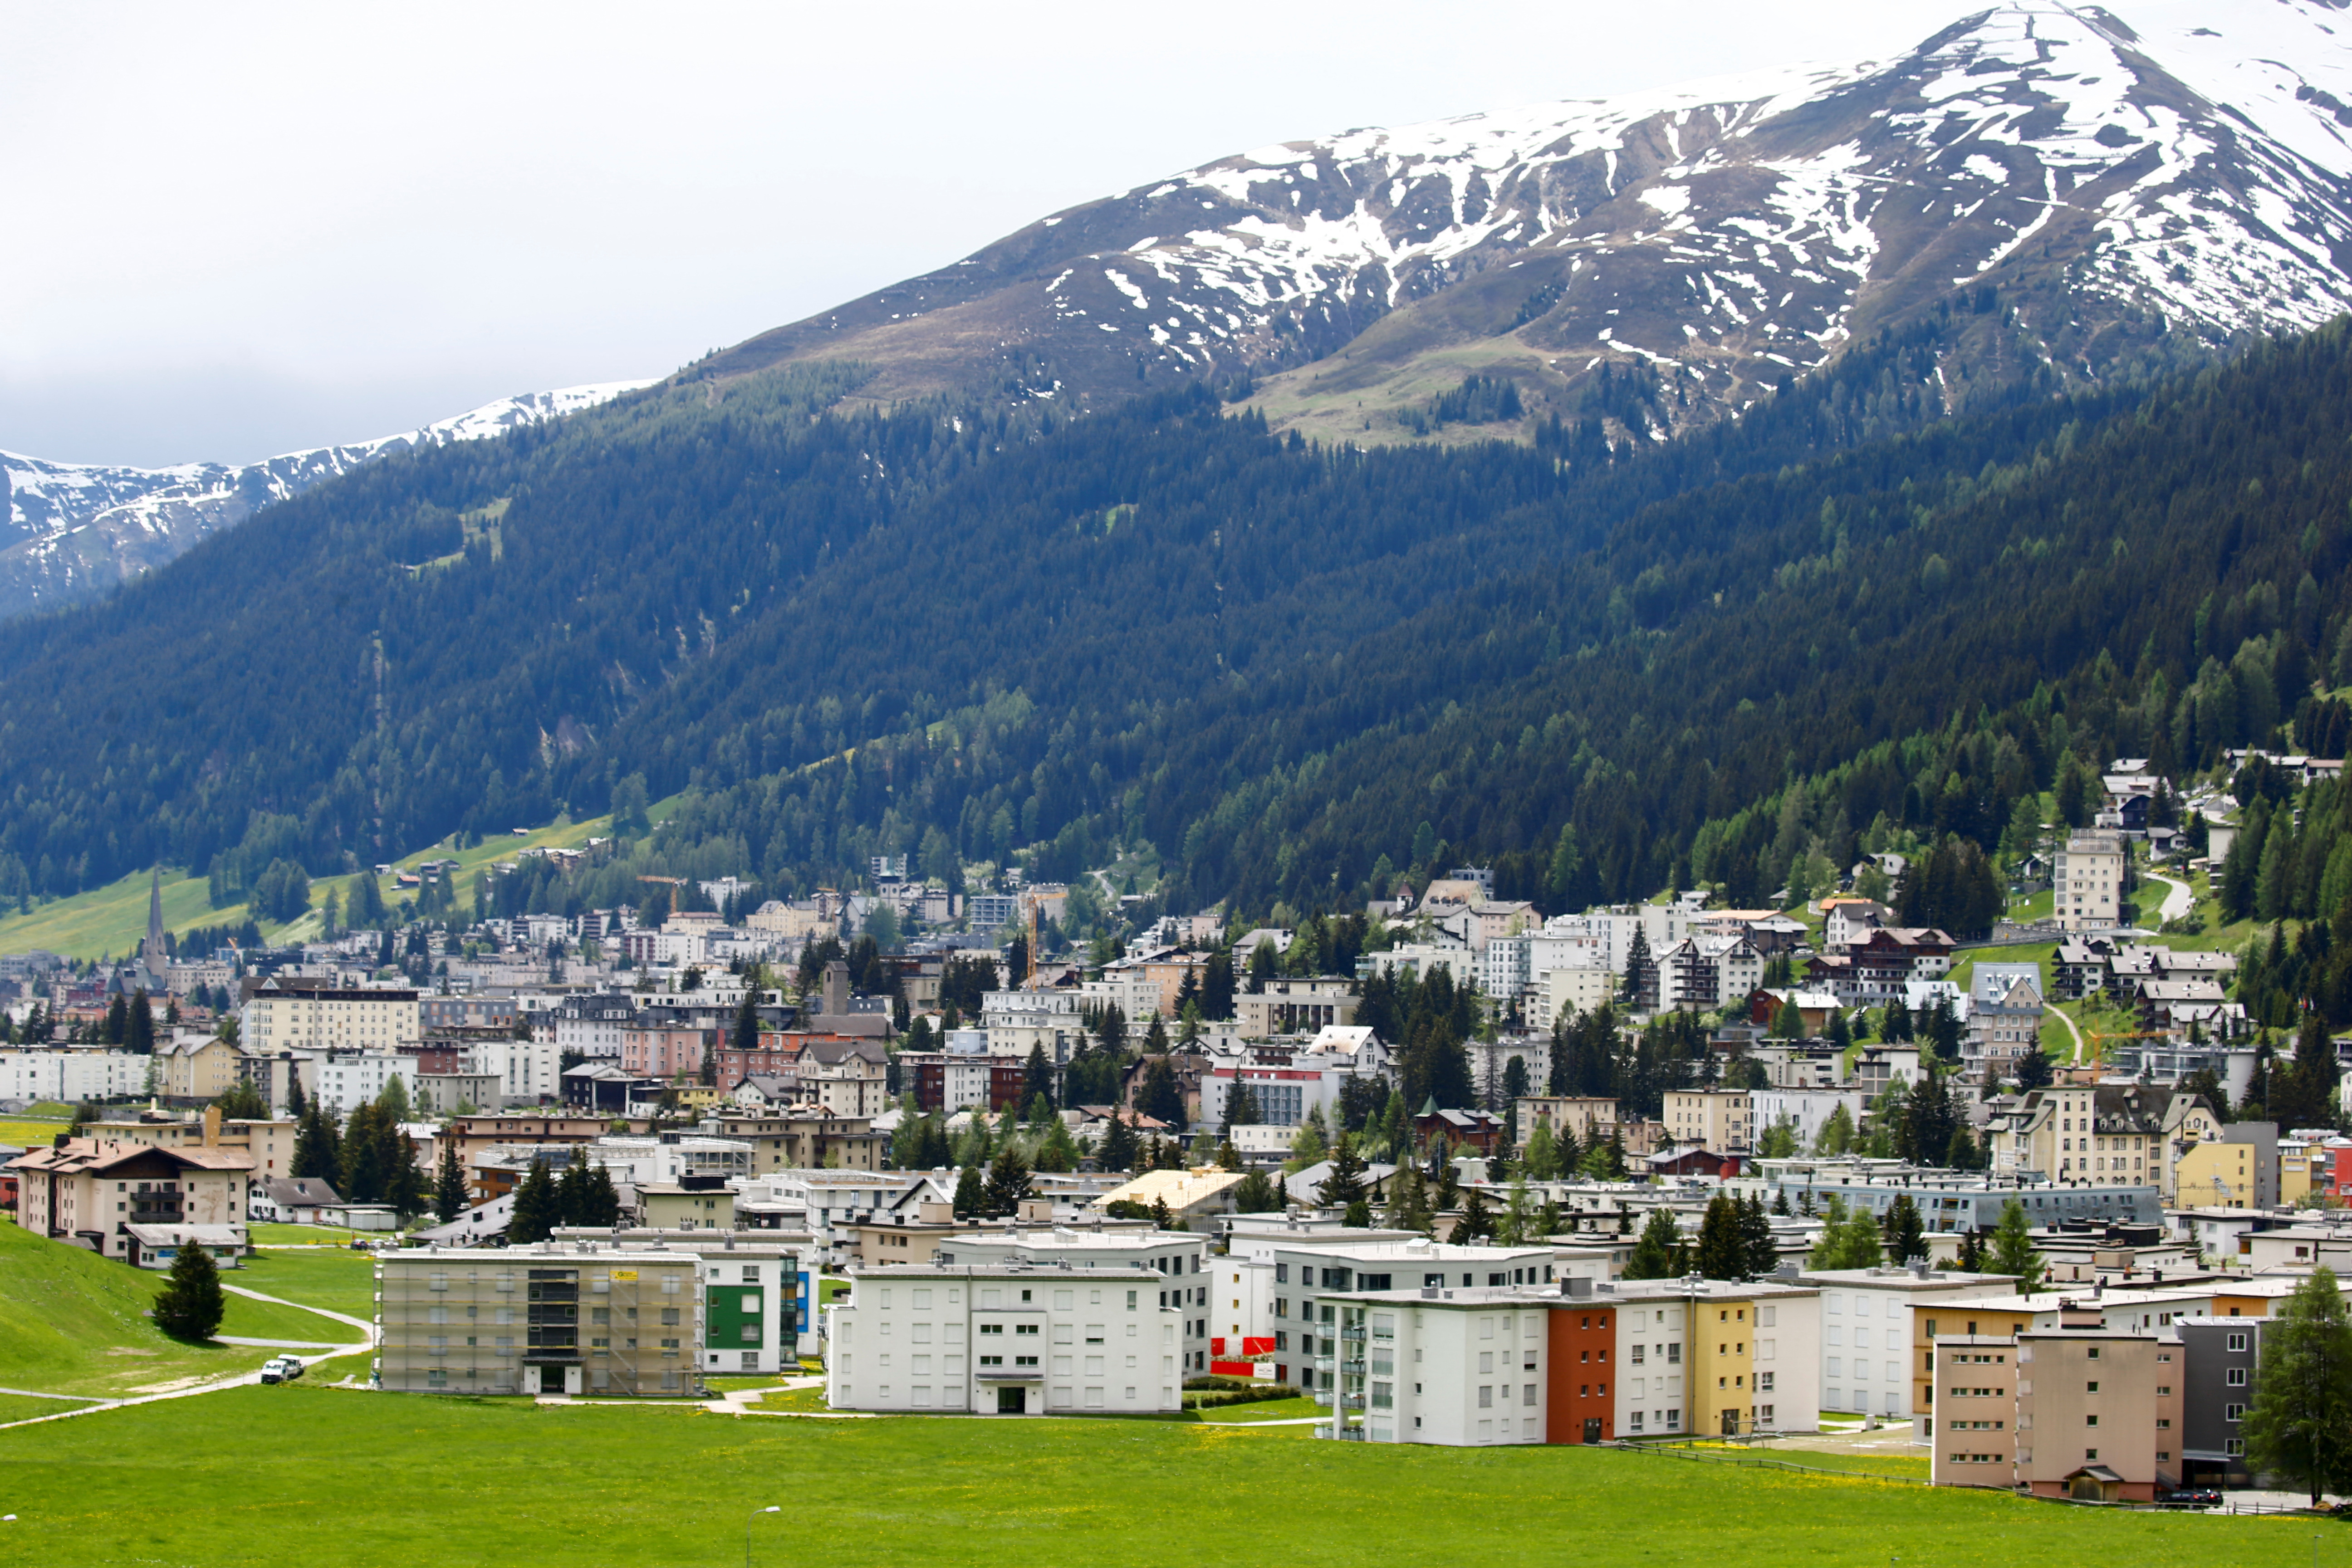 General view shows the Alpine resort Davos